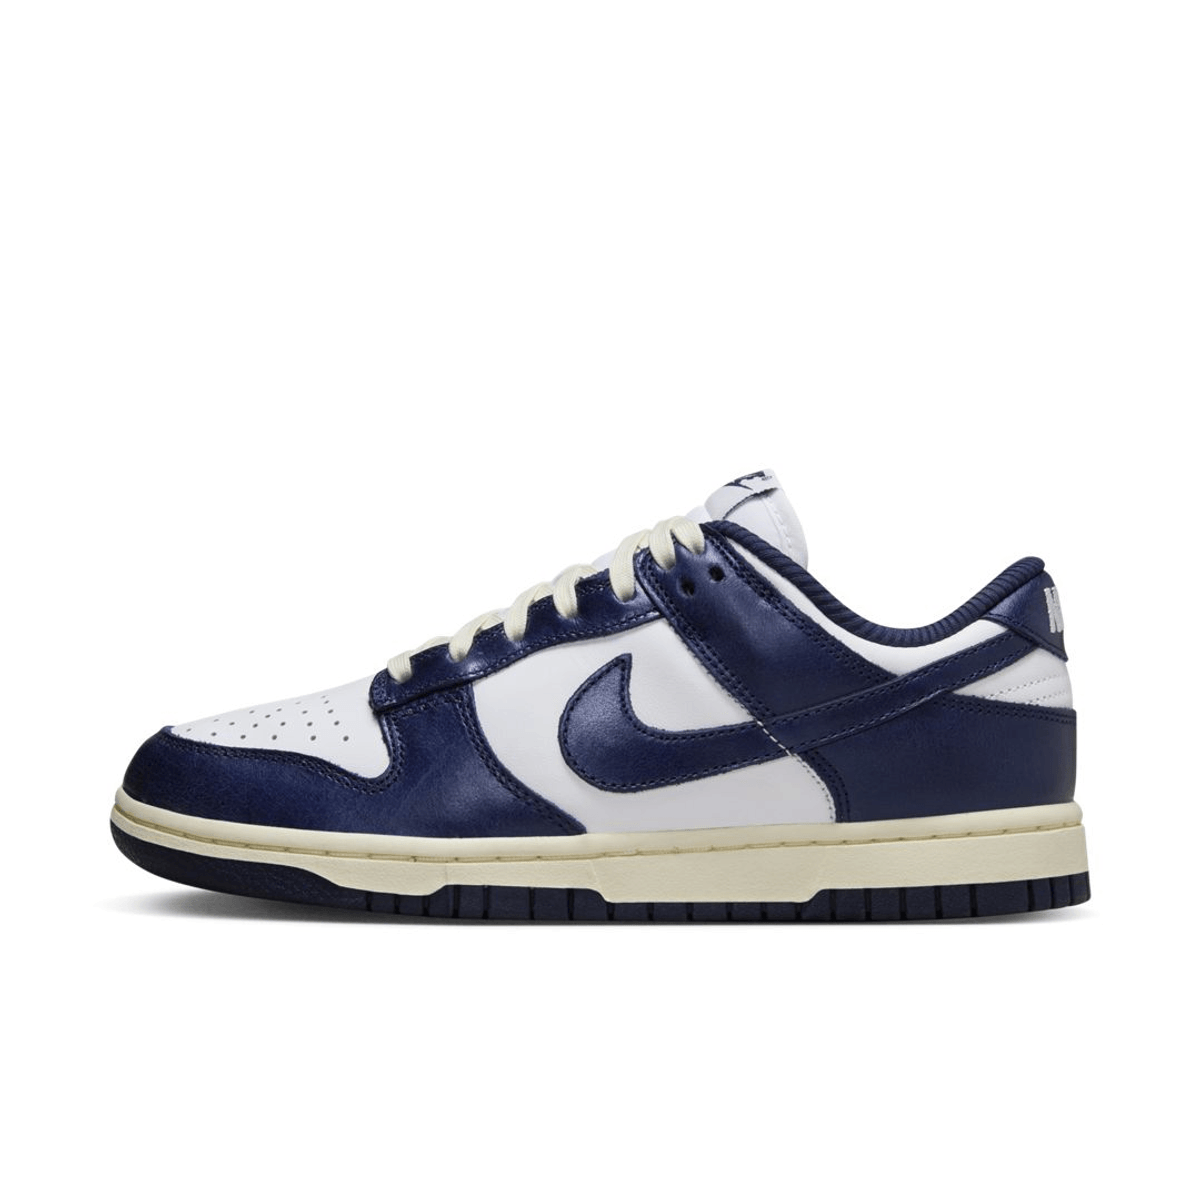 The Updated Nike Dunk Low "Vintage Navy" Is Coming Soon